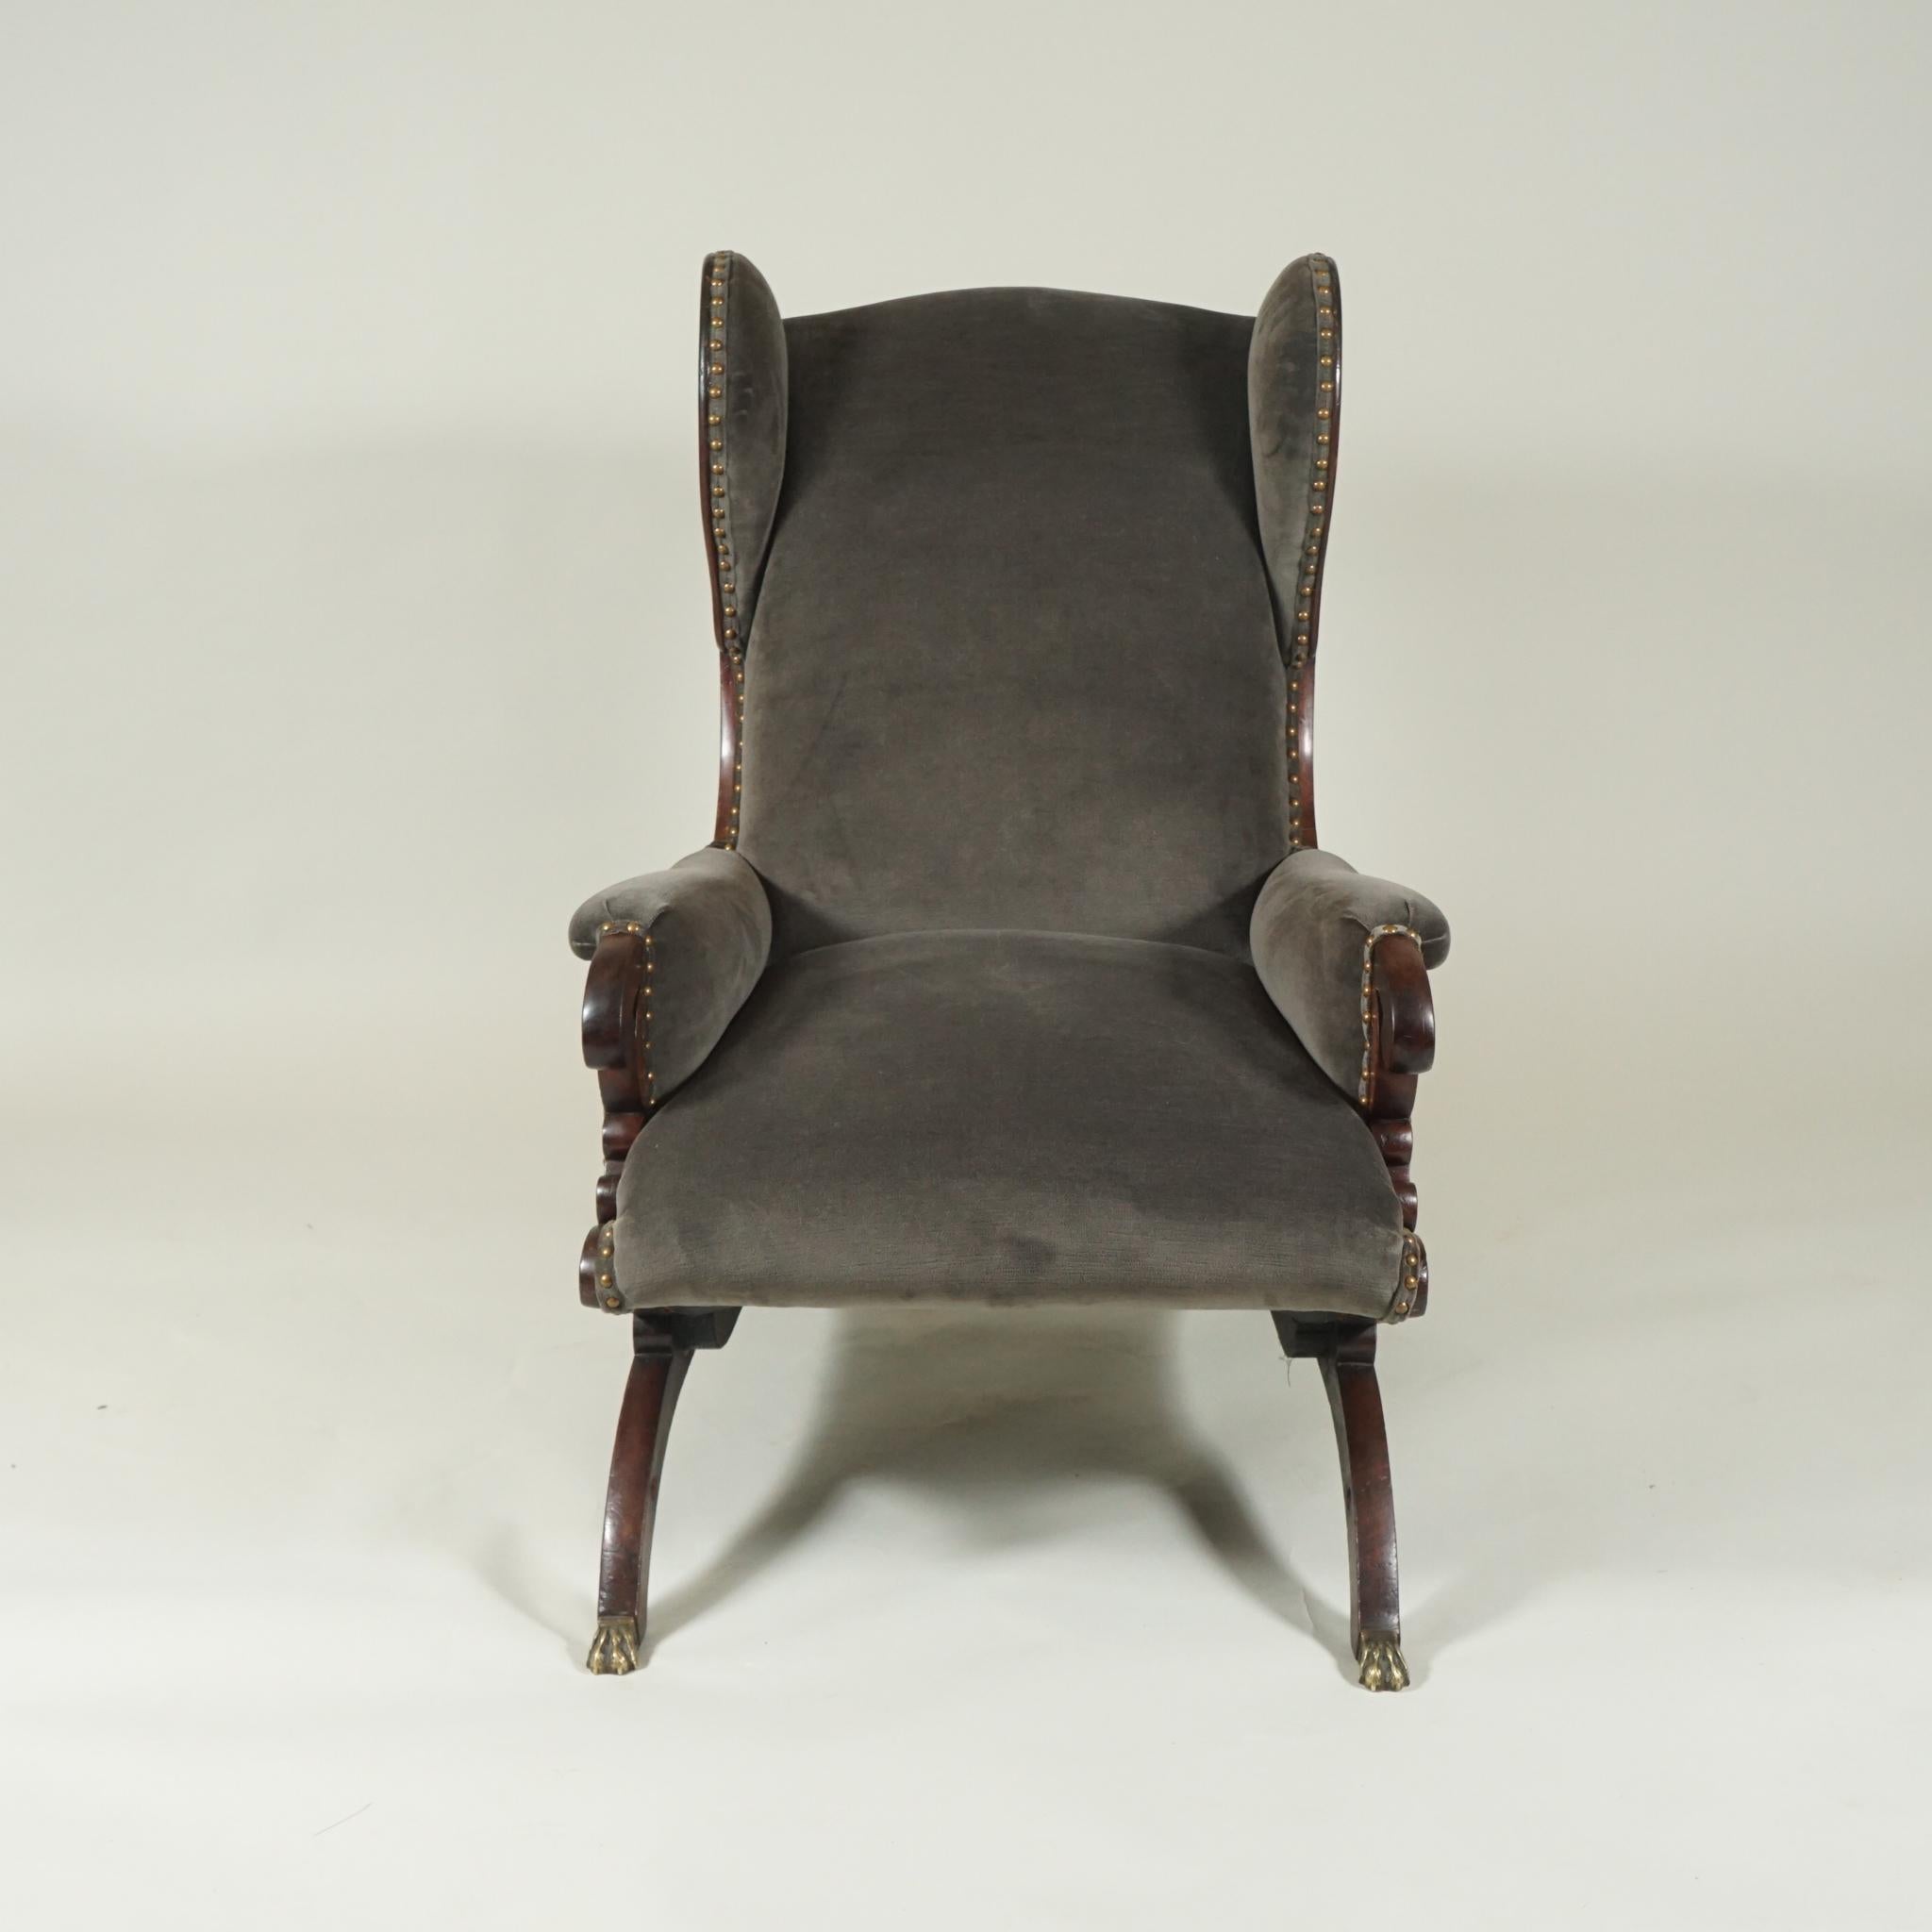 Victorian wing back lounge chair, in polished mahogany, hand carved, newly upholstered in smokey-grey mohair, with brass studs, great for a library or fireside chat.